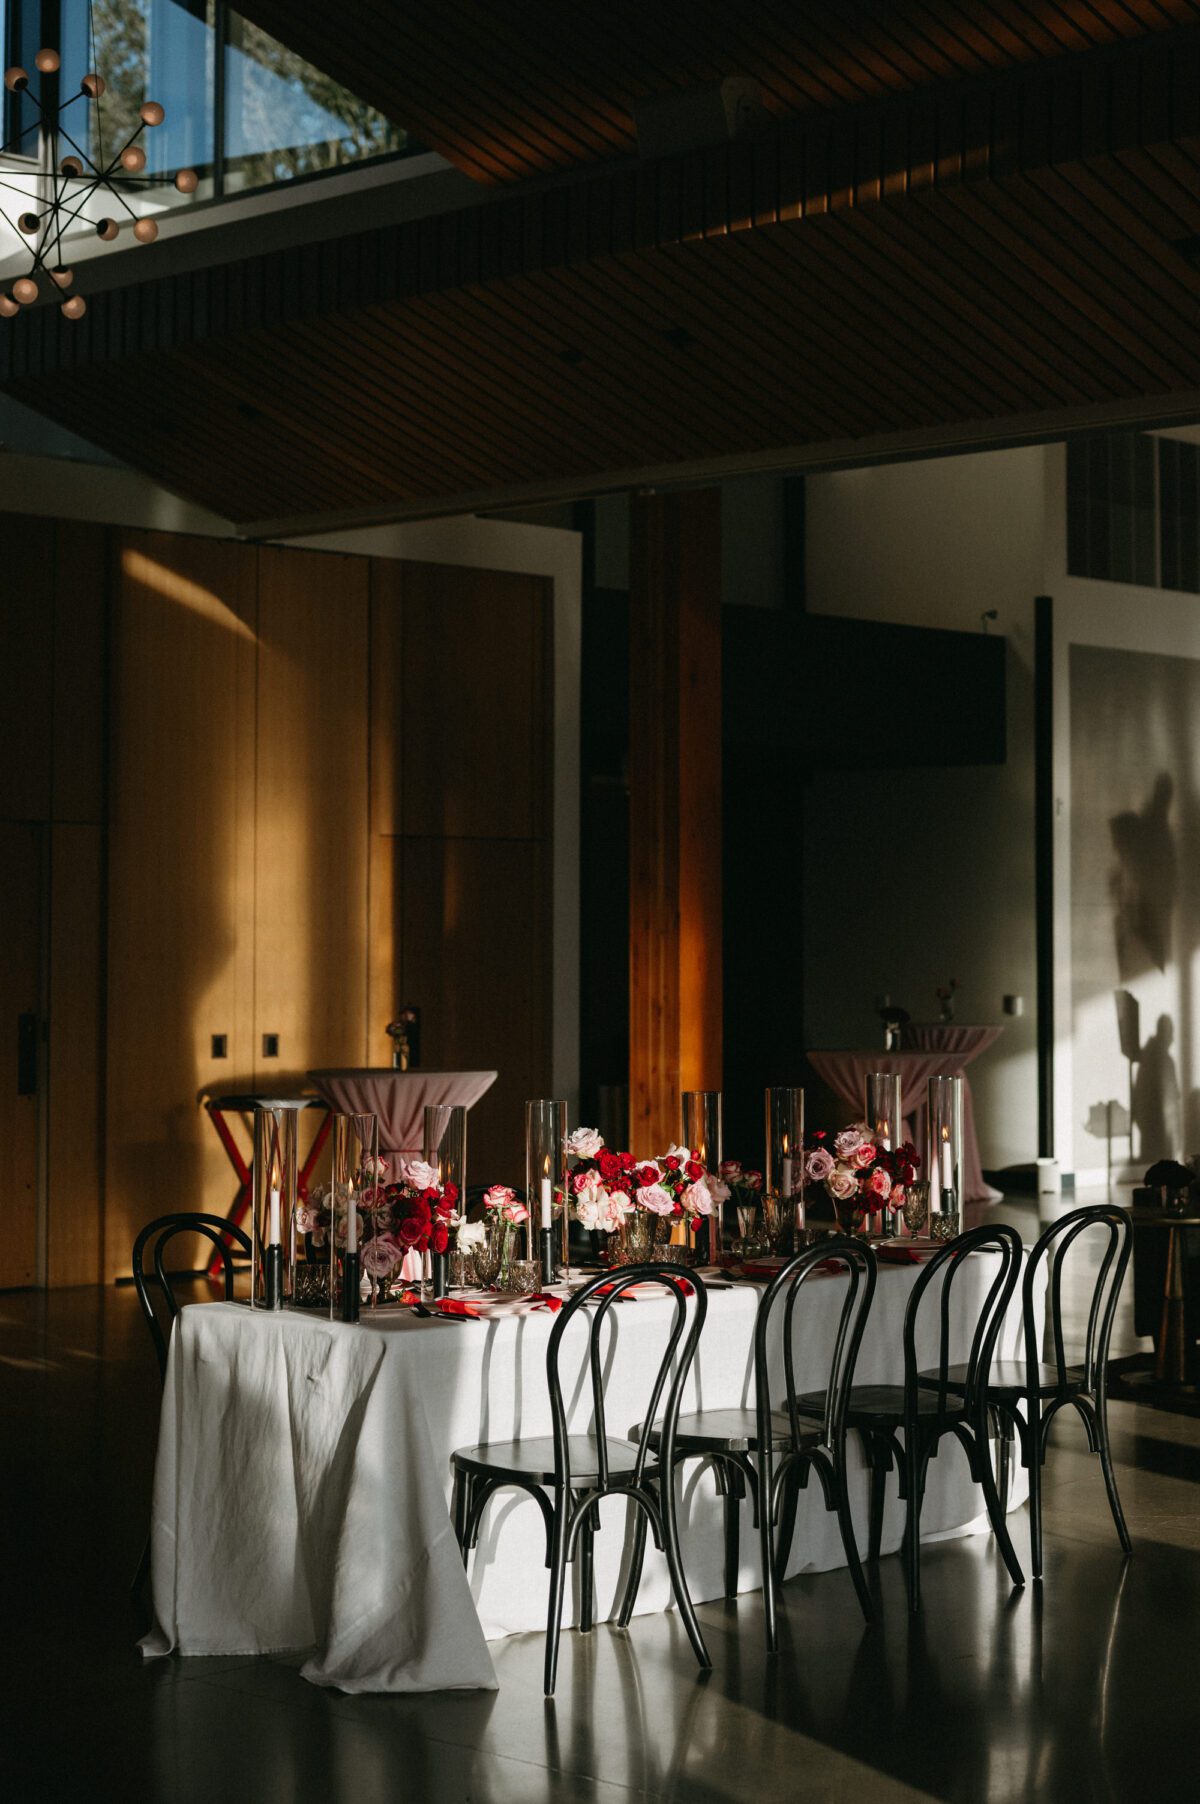 A dining table is glowing in the sunshine at the Amaterra Wines indoor wedding venue event space. The table is set with black bentwood dining chairs and red and pink florals.